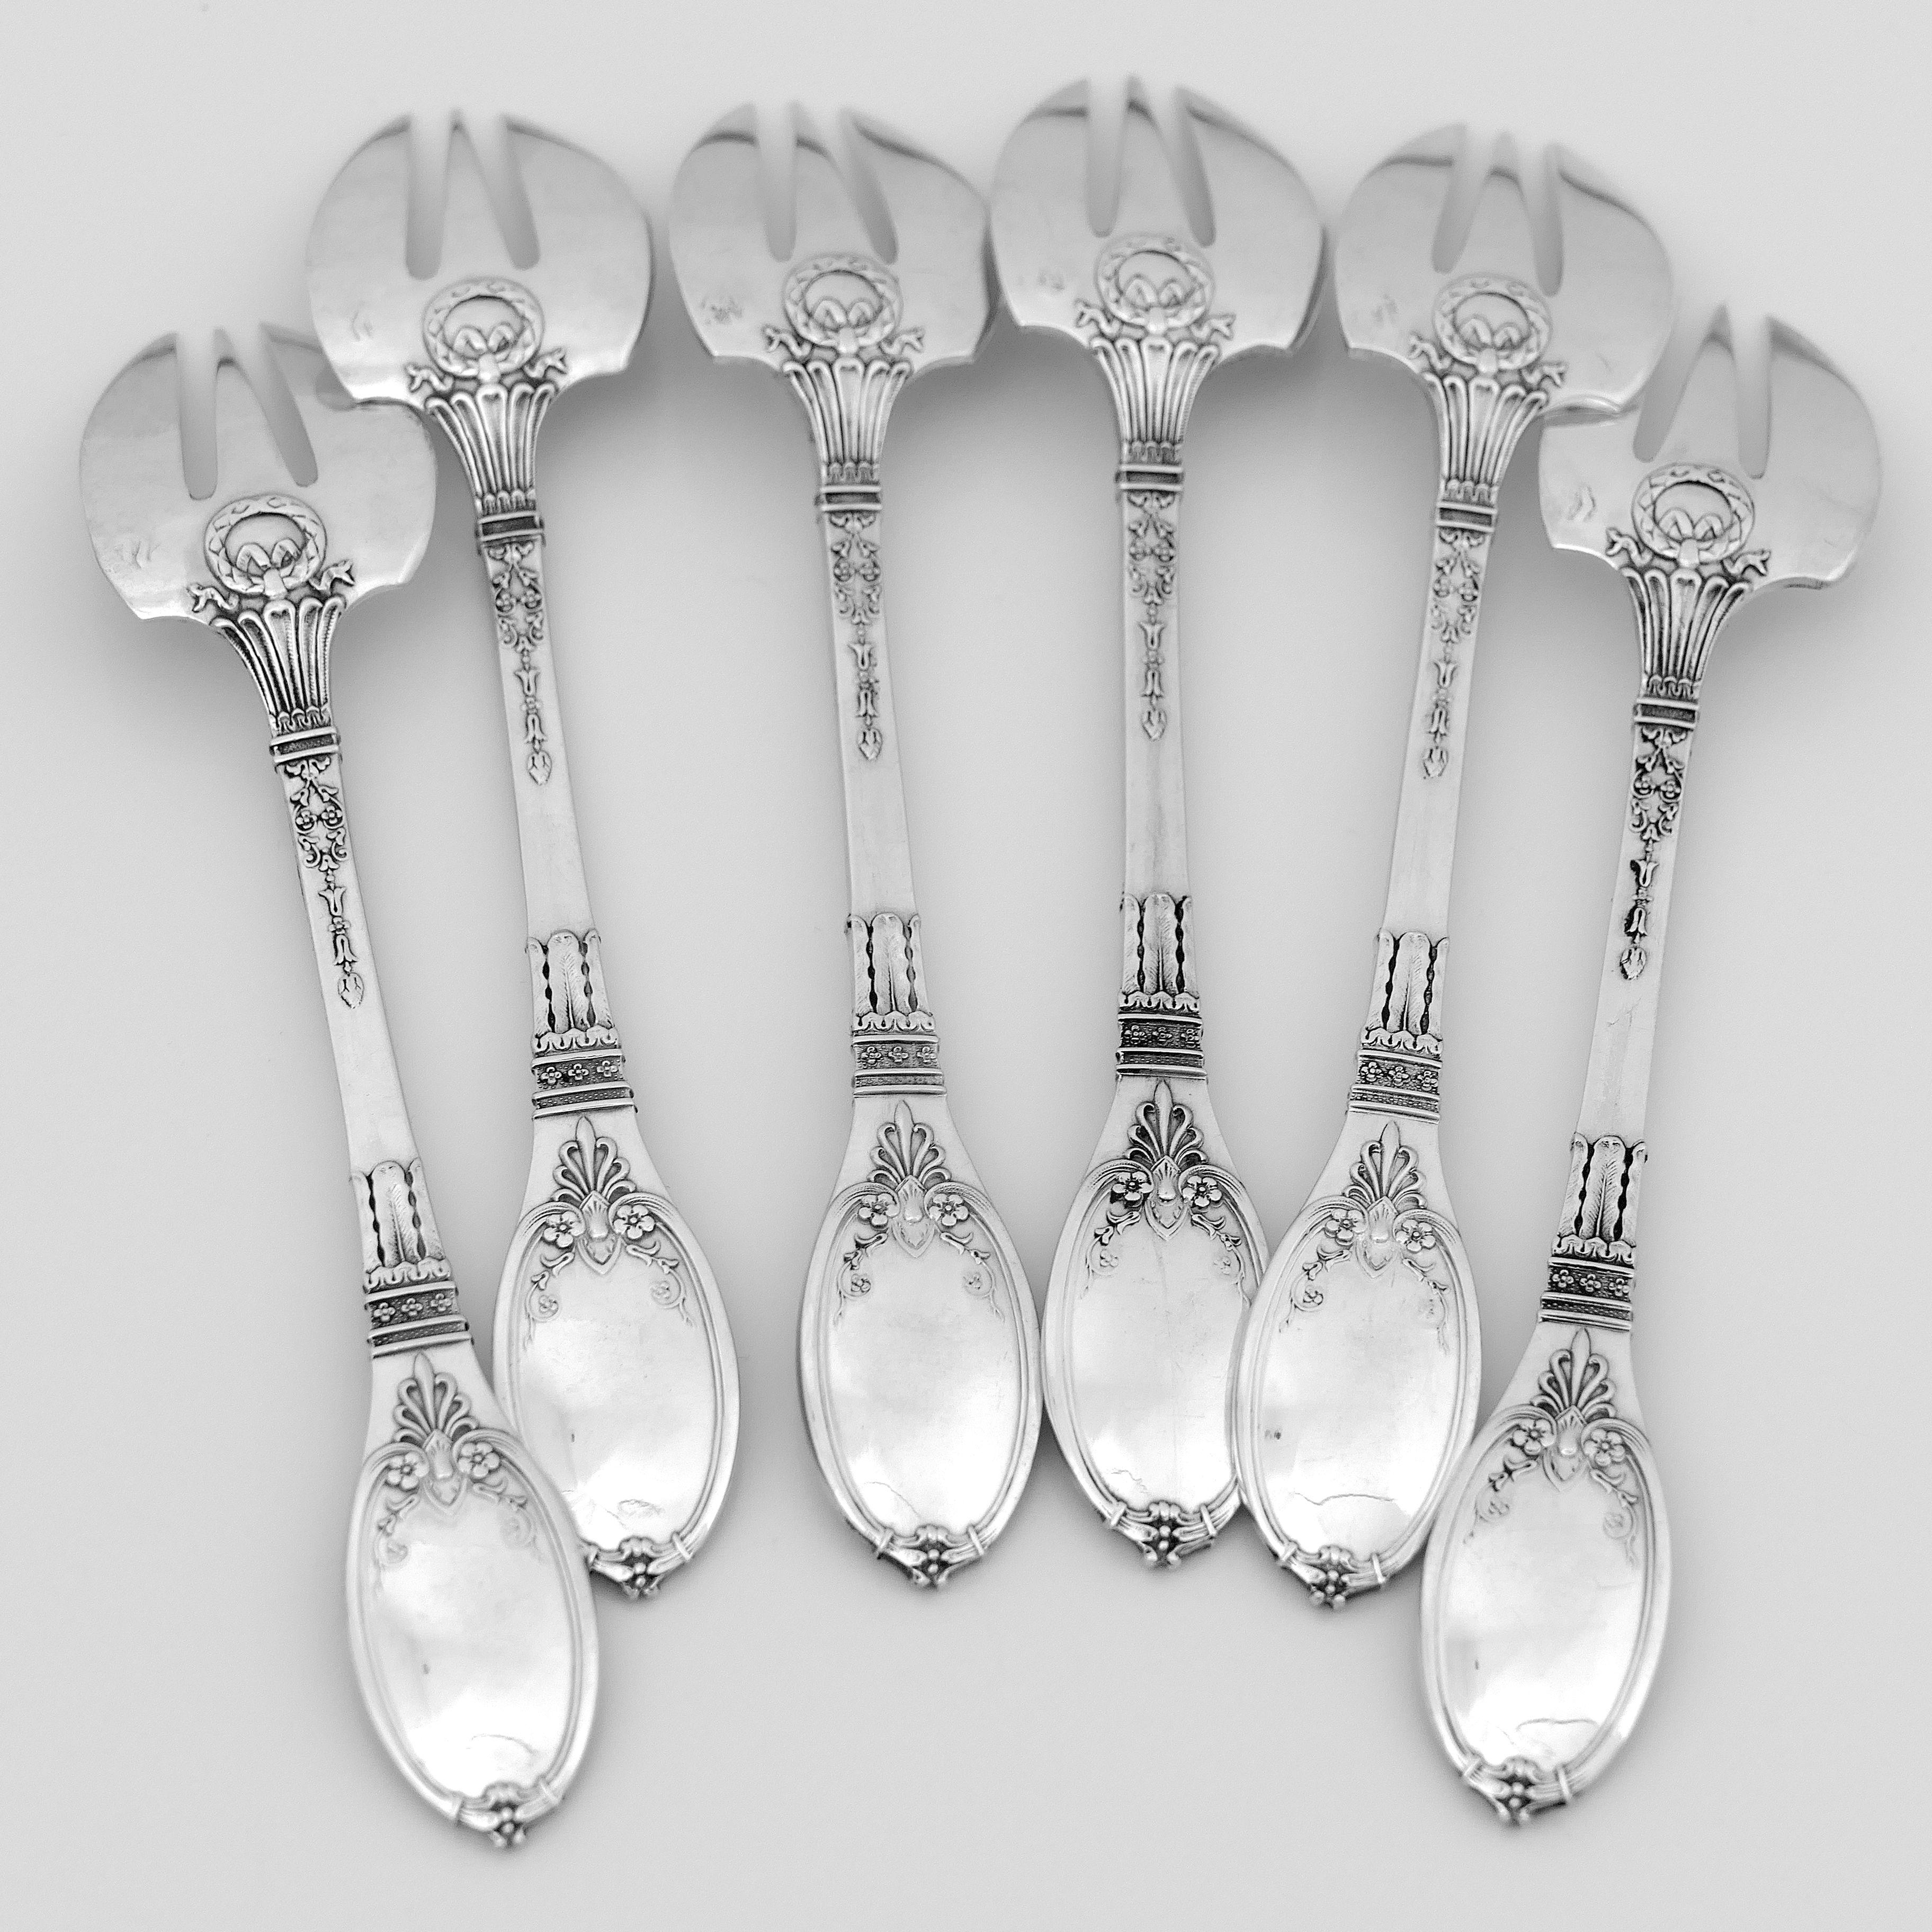 Lapparra Fabulous French Sterling Silver Oyster Forks Set 6 Pc, Empire Torch For Sale 5